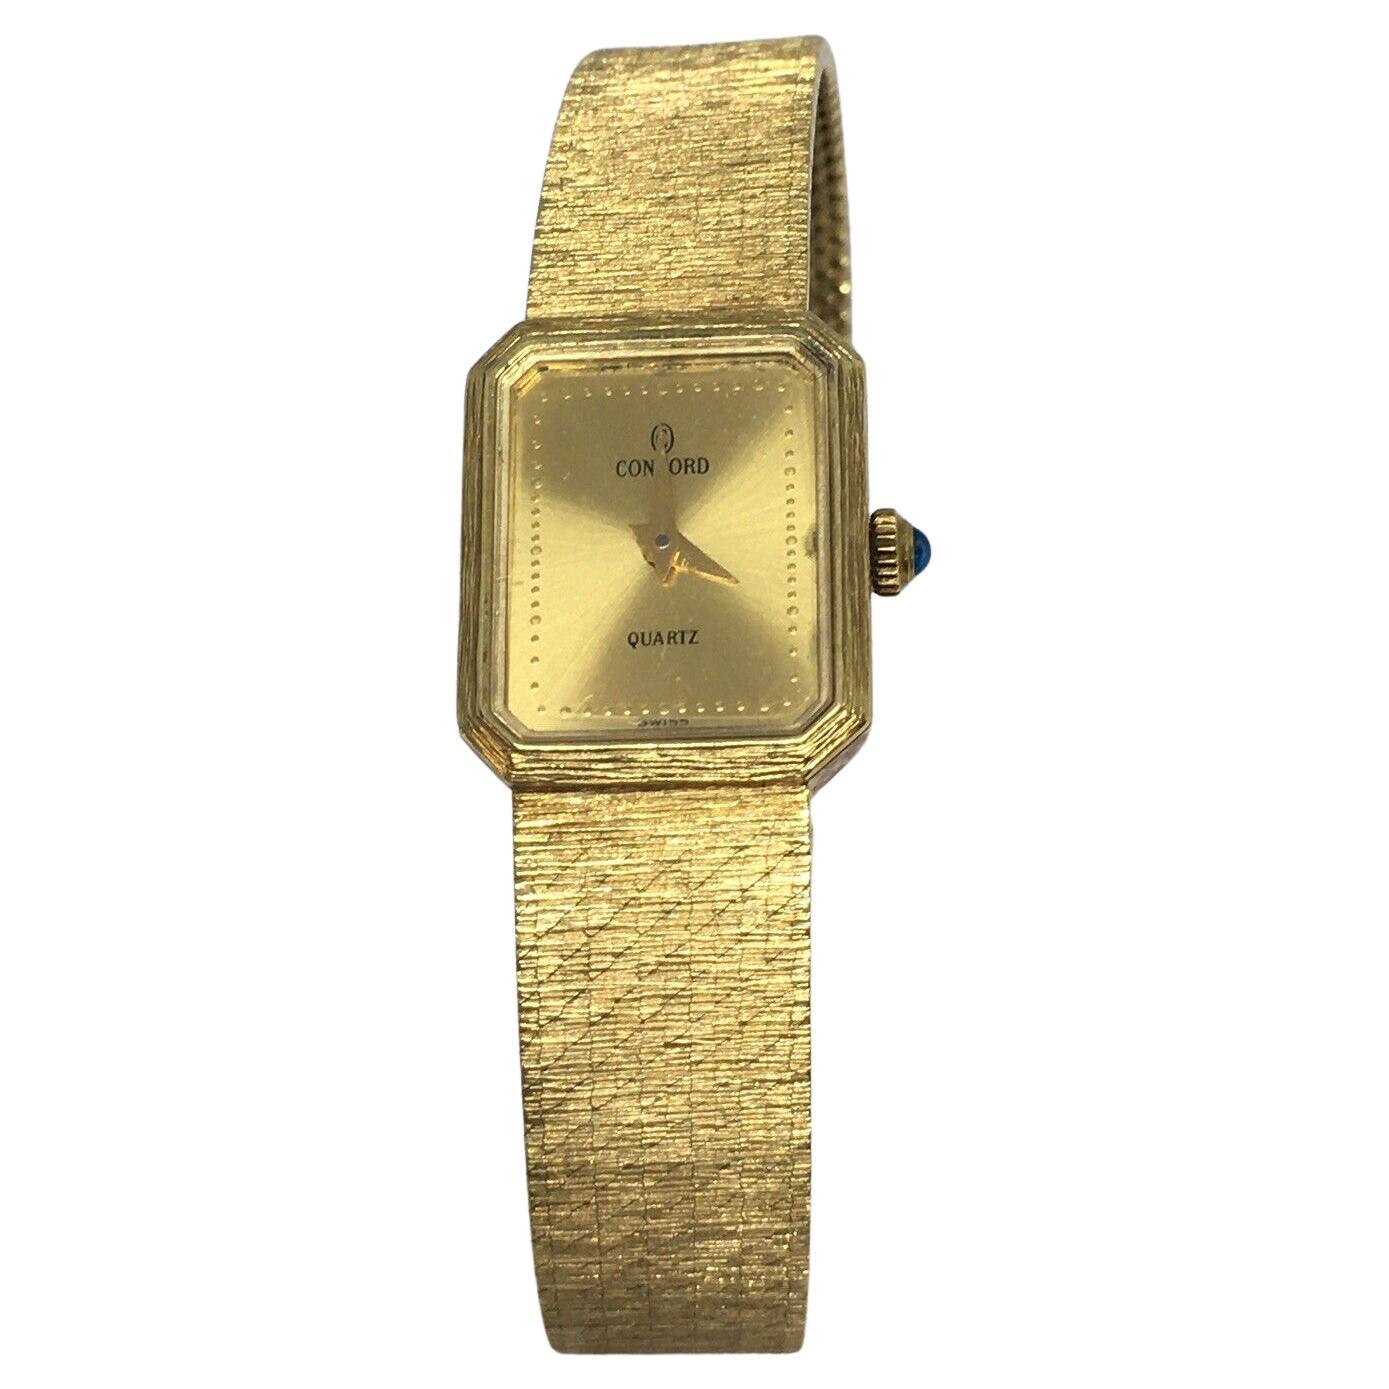 Lady's 14K Yellow Solid Gold Concord quartz Watch Factory Marked Case 6 inch en vente